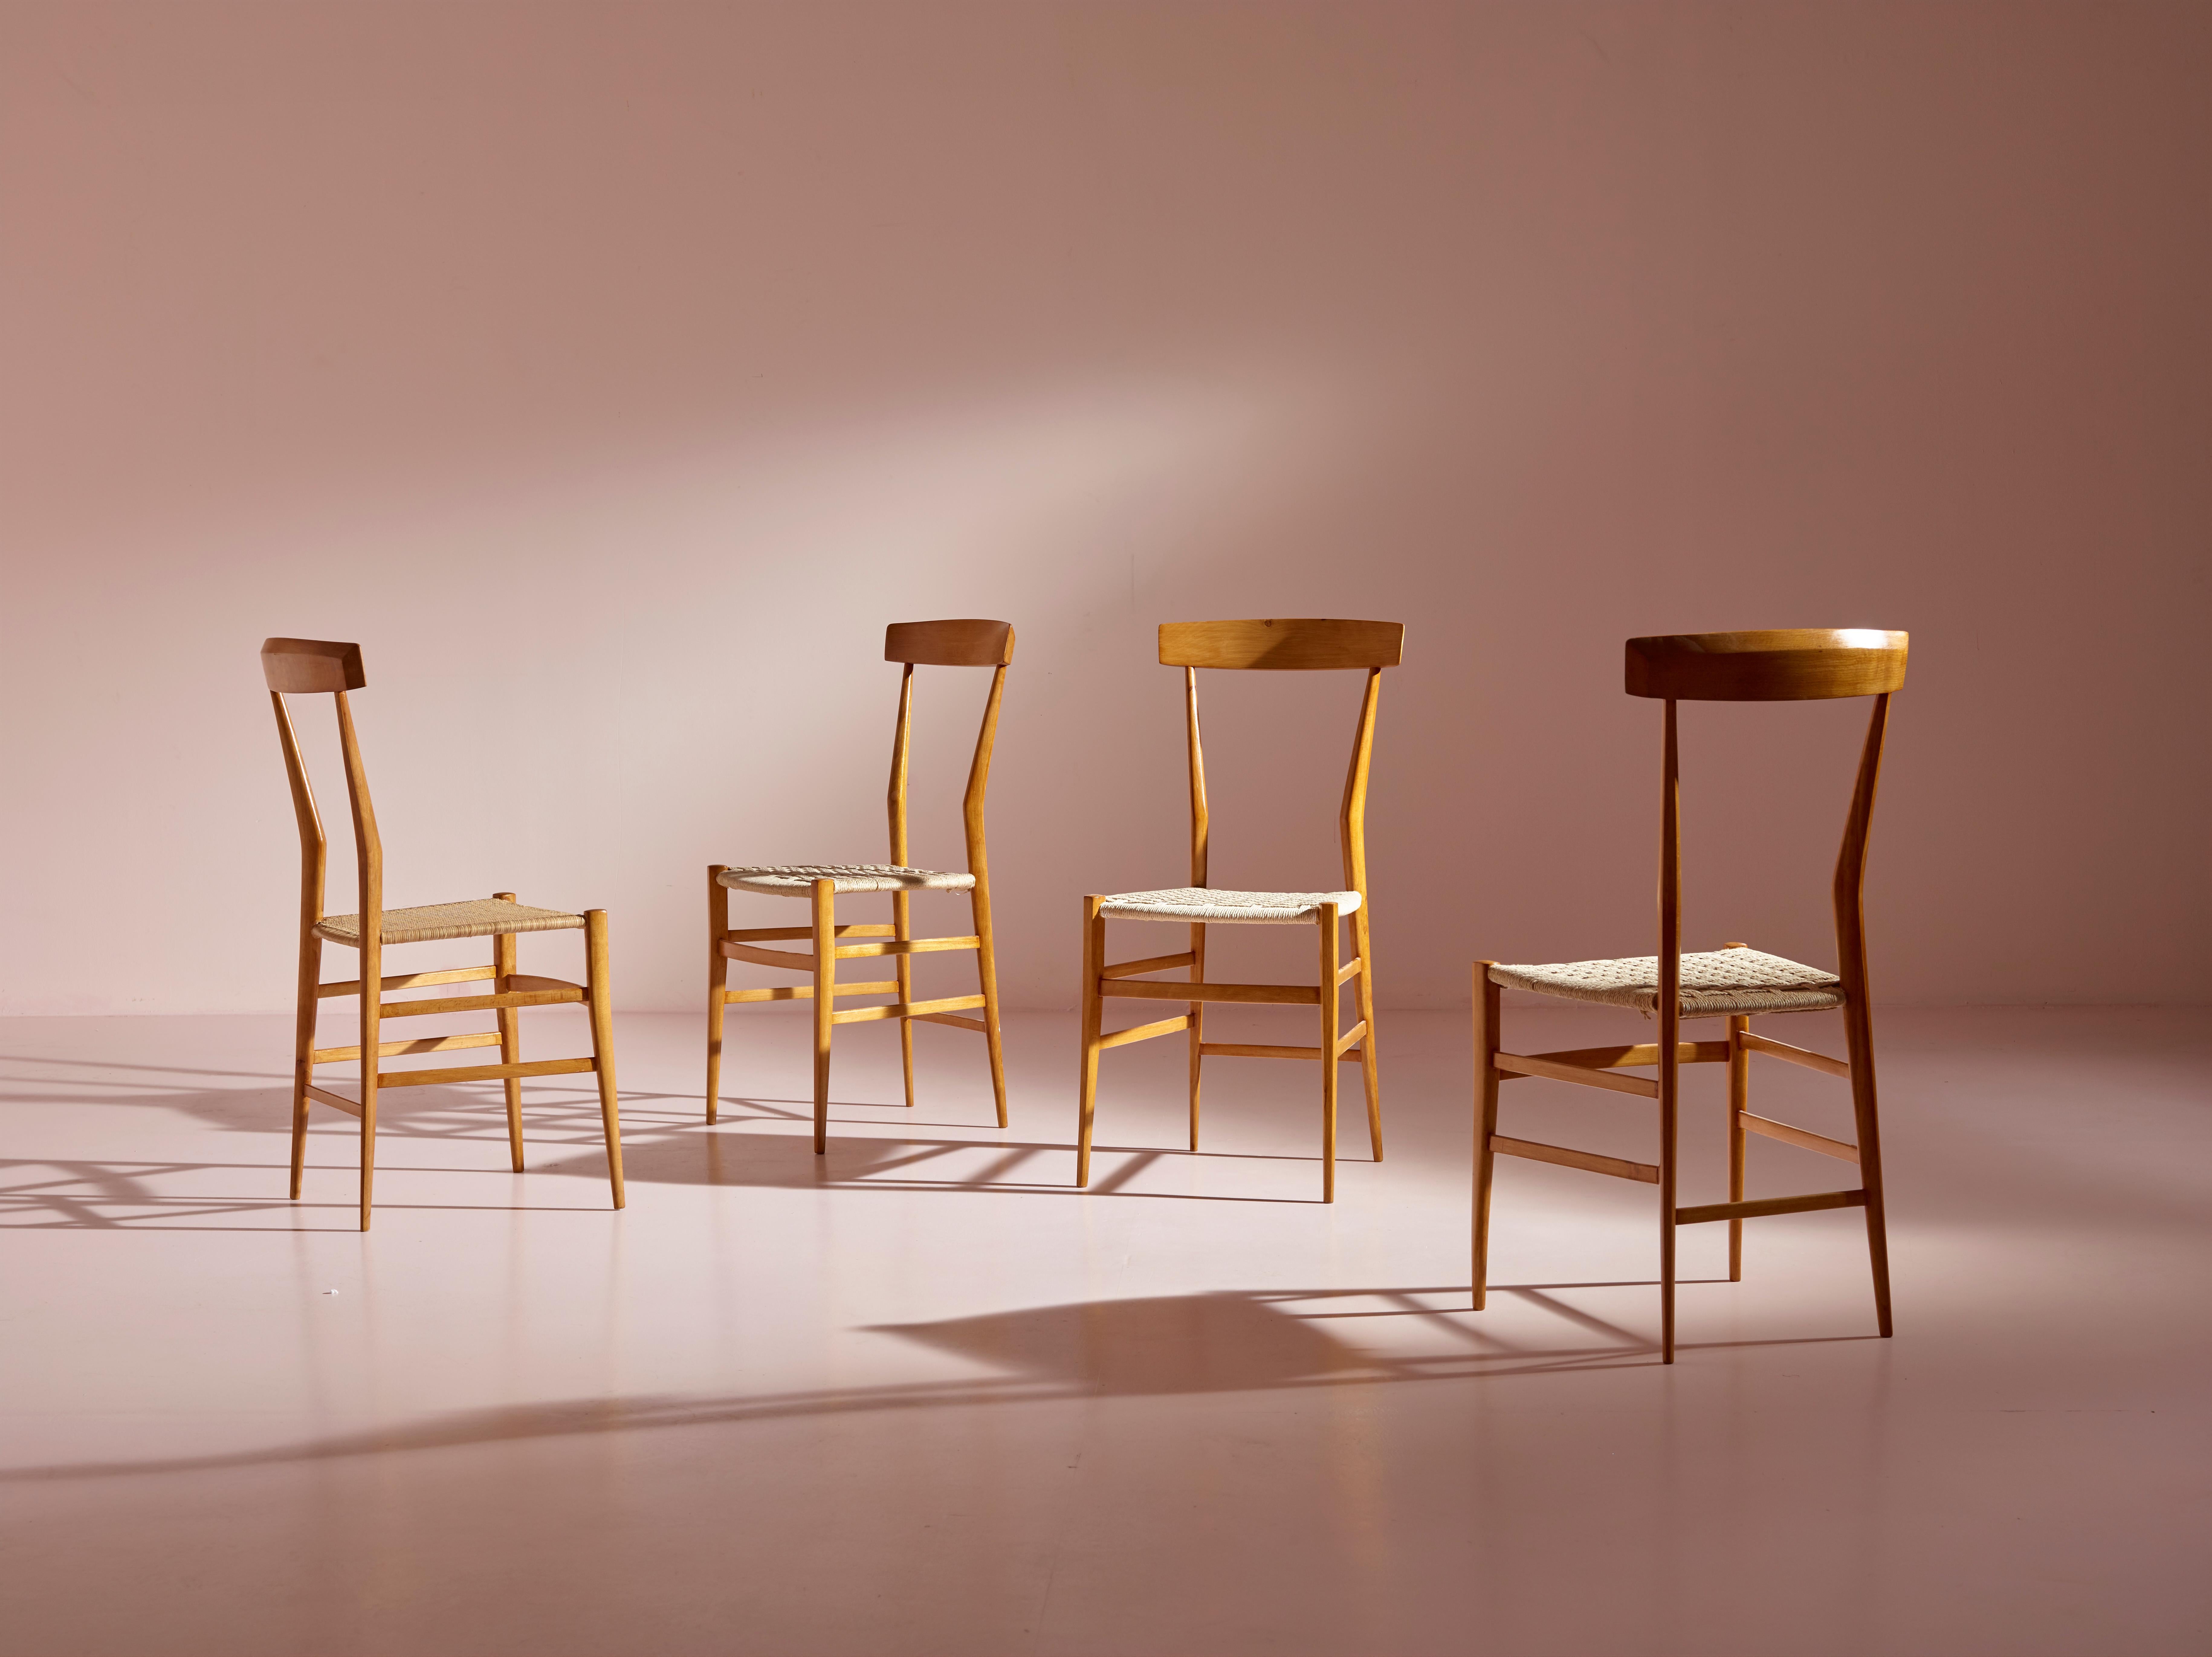 A set of 4 mid-century Chiavari high back chairs, Model P5, crafted by Fratelli Podestà in the 1970s.

These chairs, made from ash wood and cane, showcase the hallmarks of Chiavari chair design with their light yet sturdy build. What sets the P5